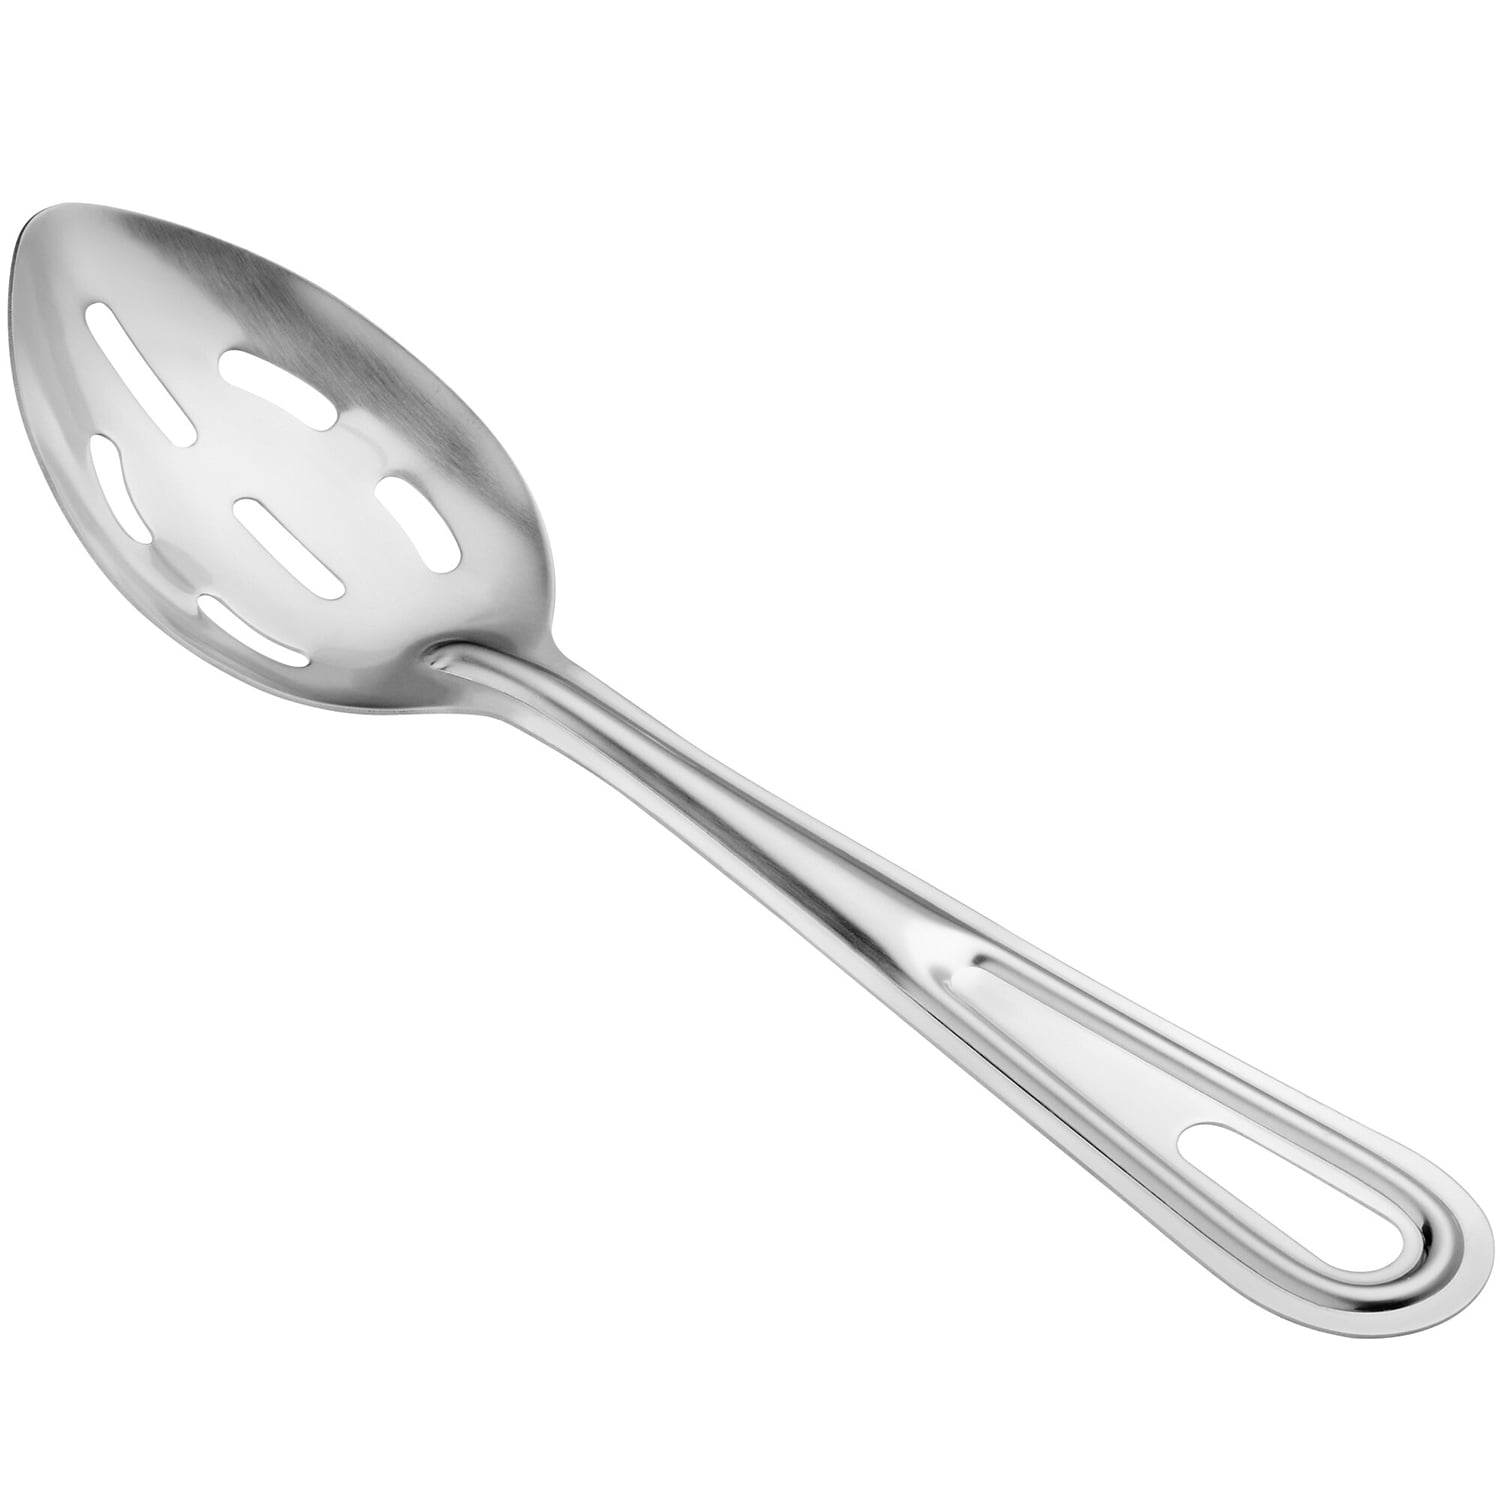 Serving Perforated Spoon 18"/ 45cm Heavy Duty Catering Utensil Stainless Steel 